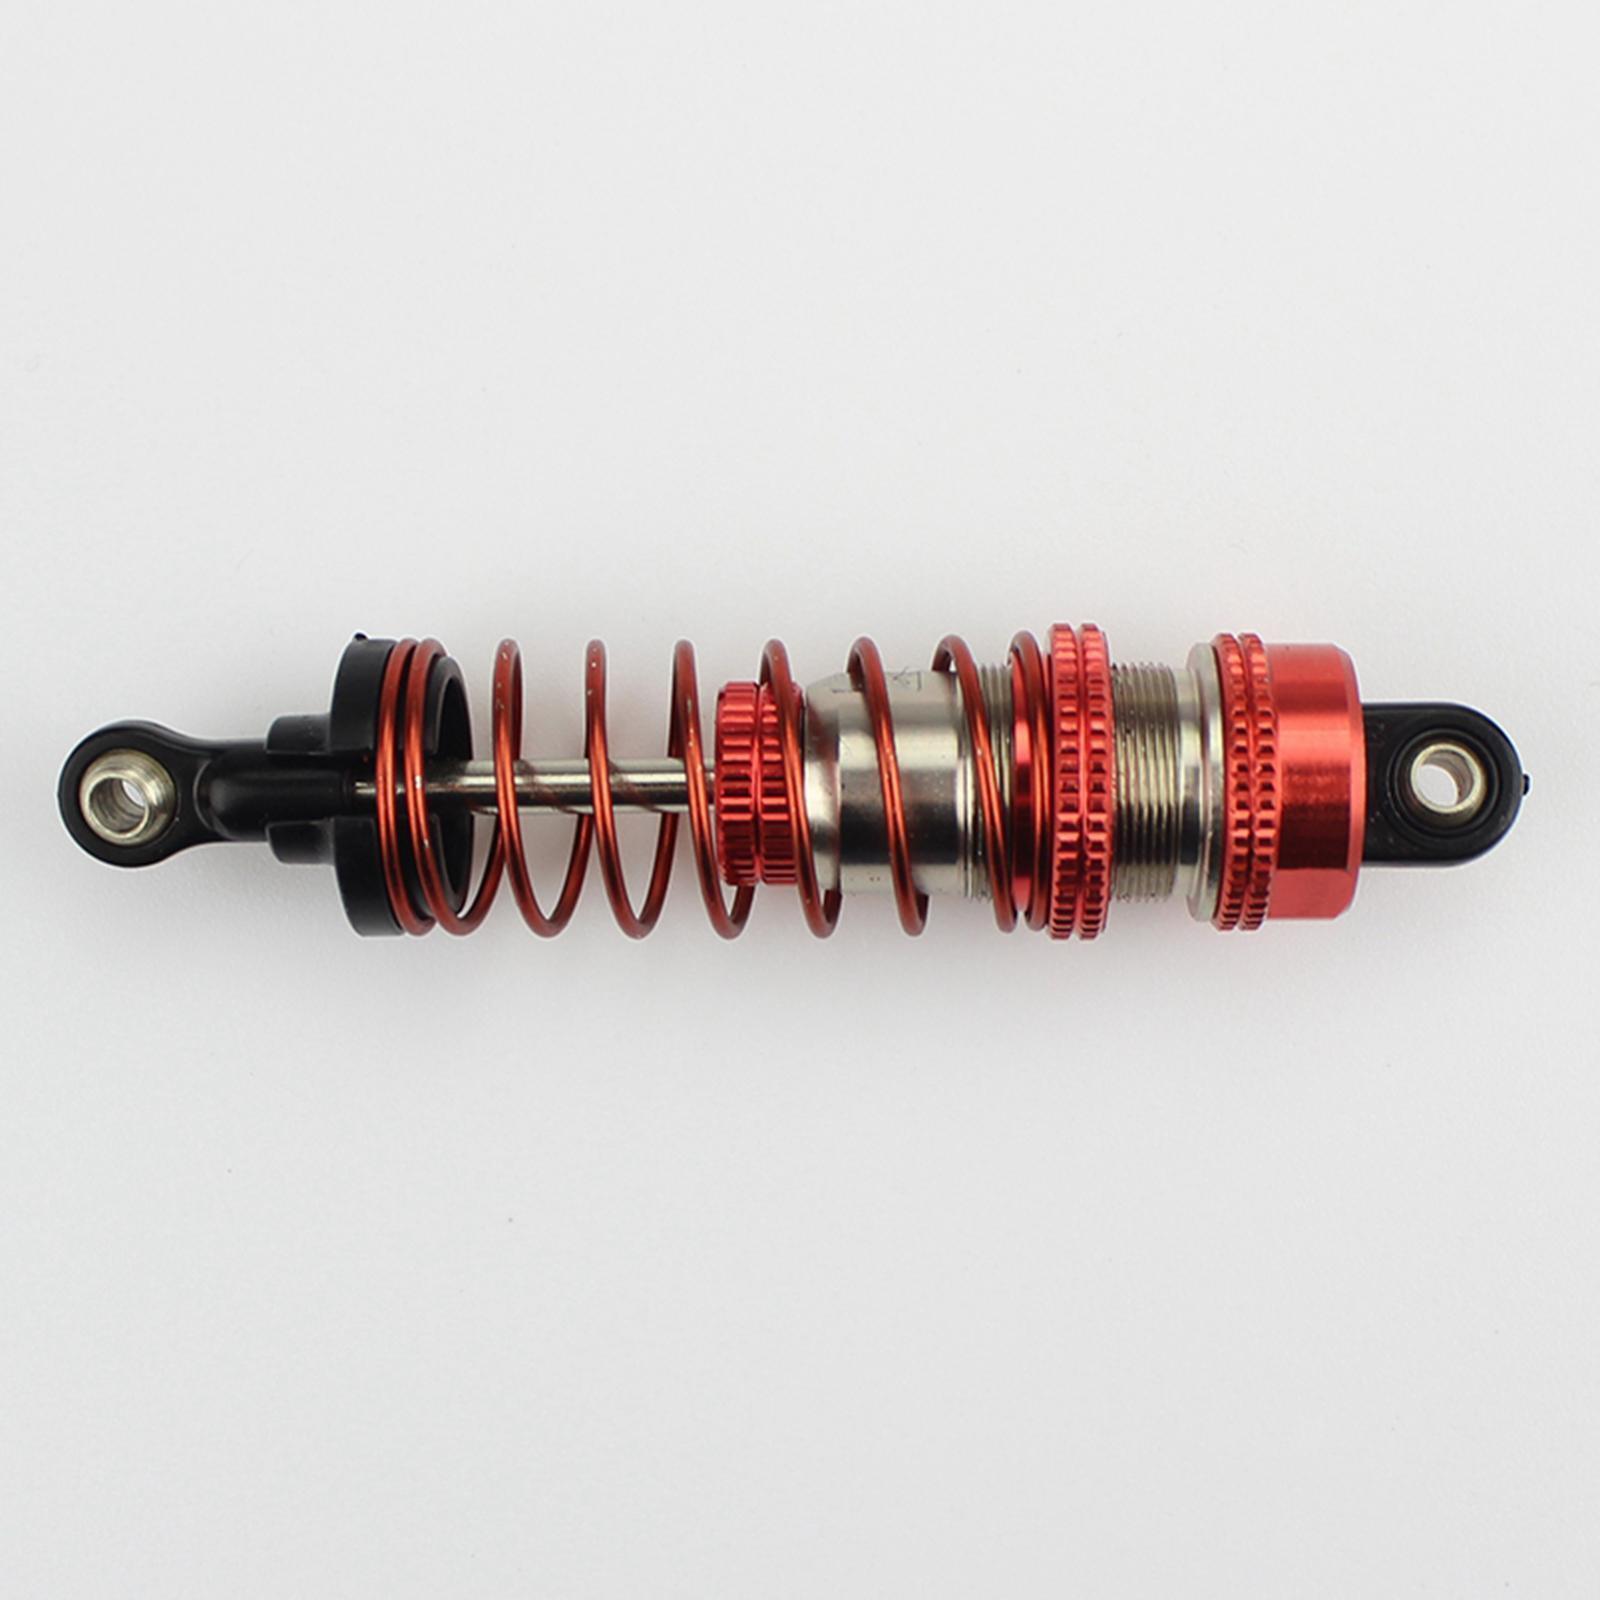 RC Car Metal 124018-1849 Rear Shock Absorber Upgrade Parts for WLTOYS 124018